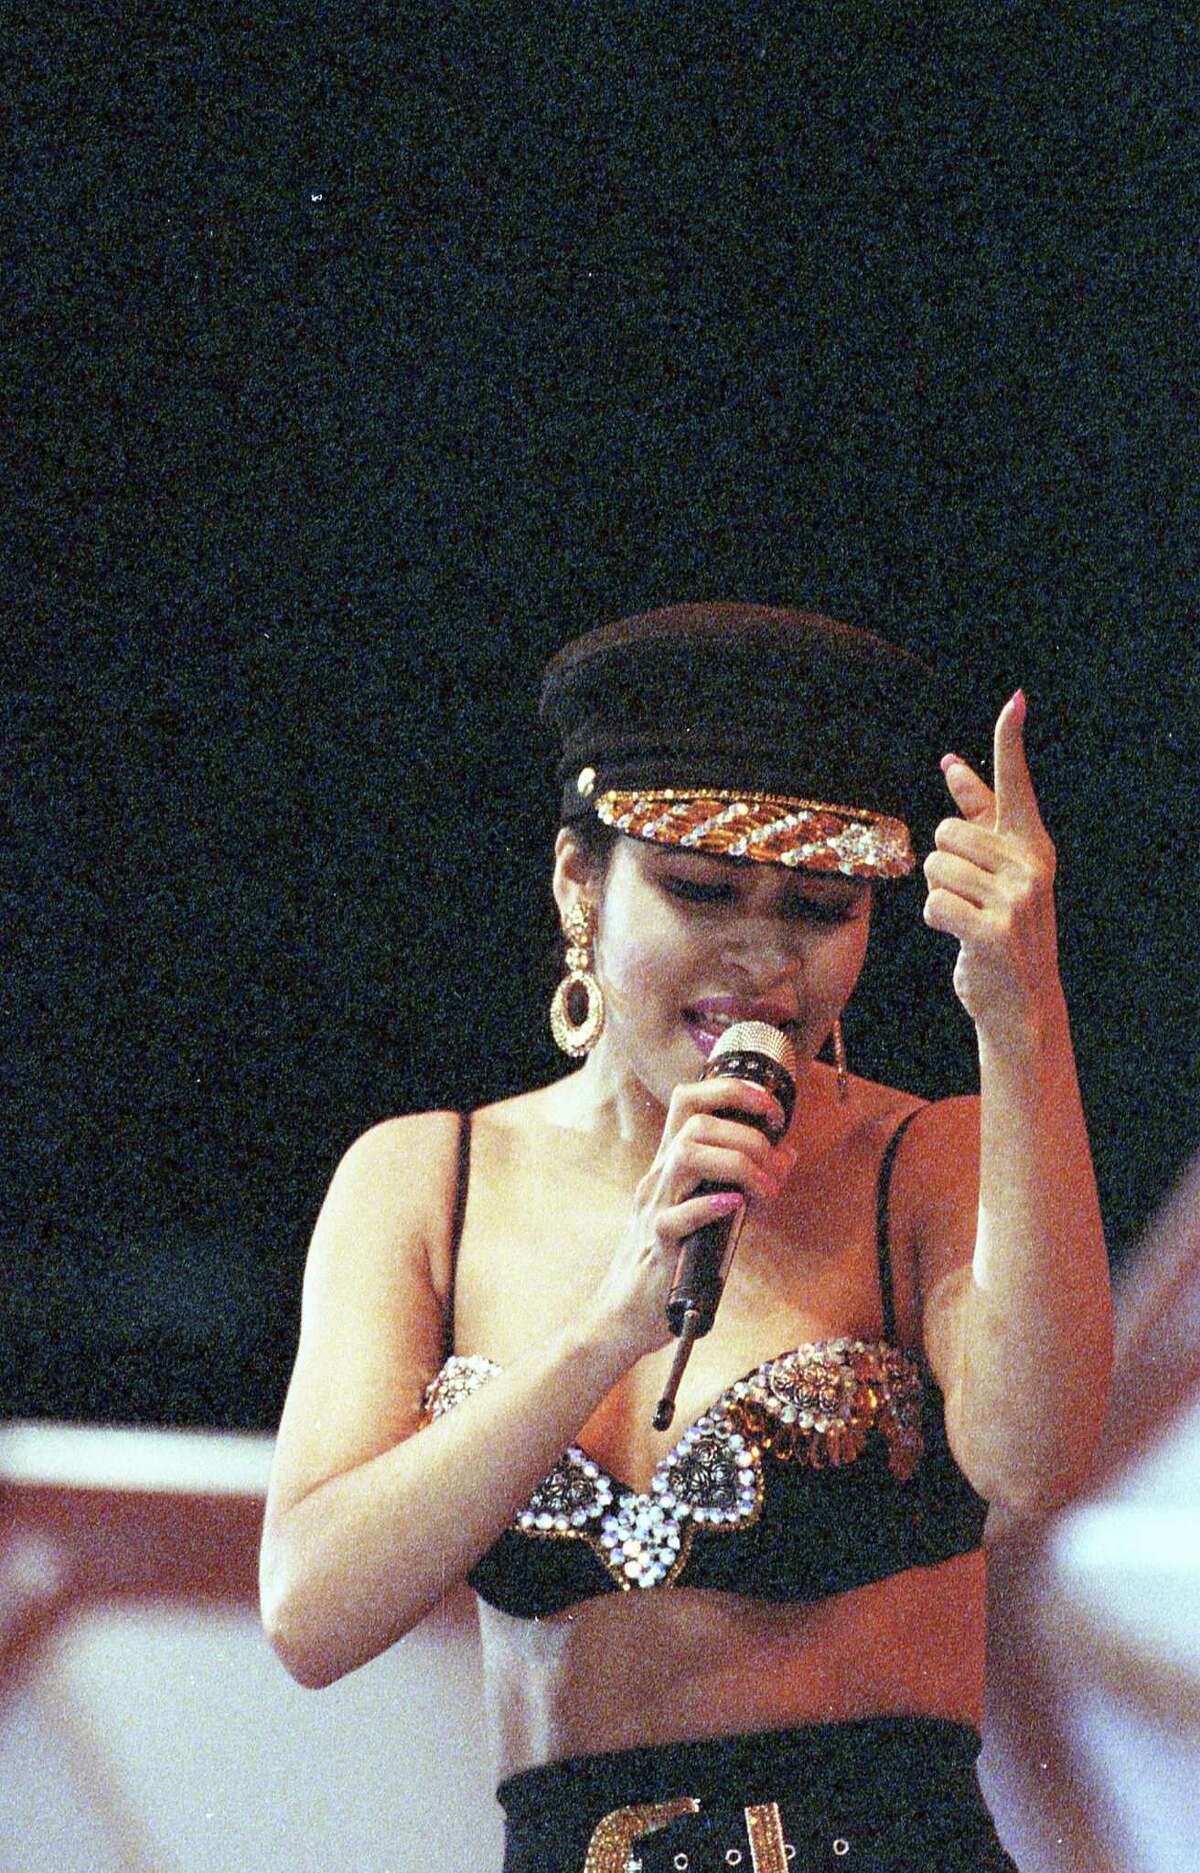 02/28/1993 - Selena performs at the Houston Livestock Show and Rodeo inside the Astrodome. The concert drew 66,994 people and set an all-time attendance record.